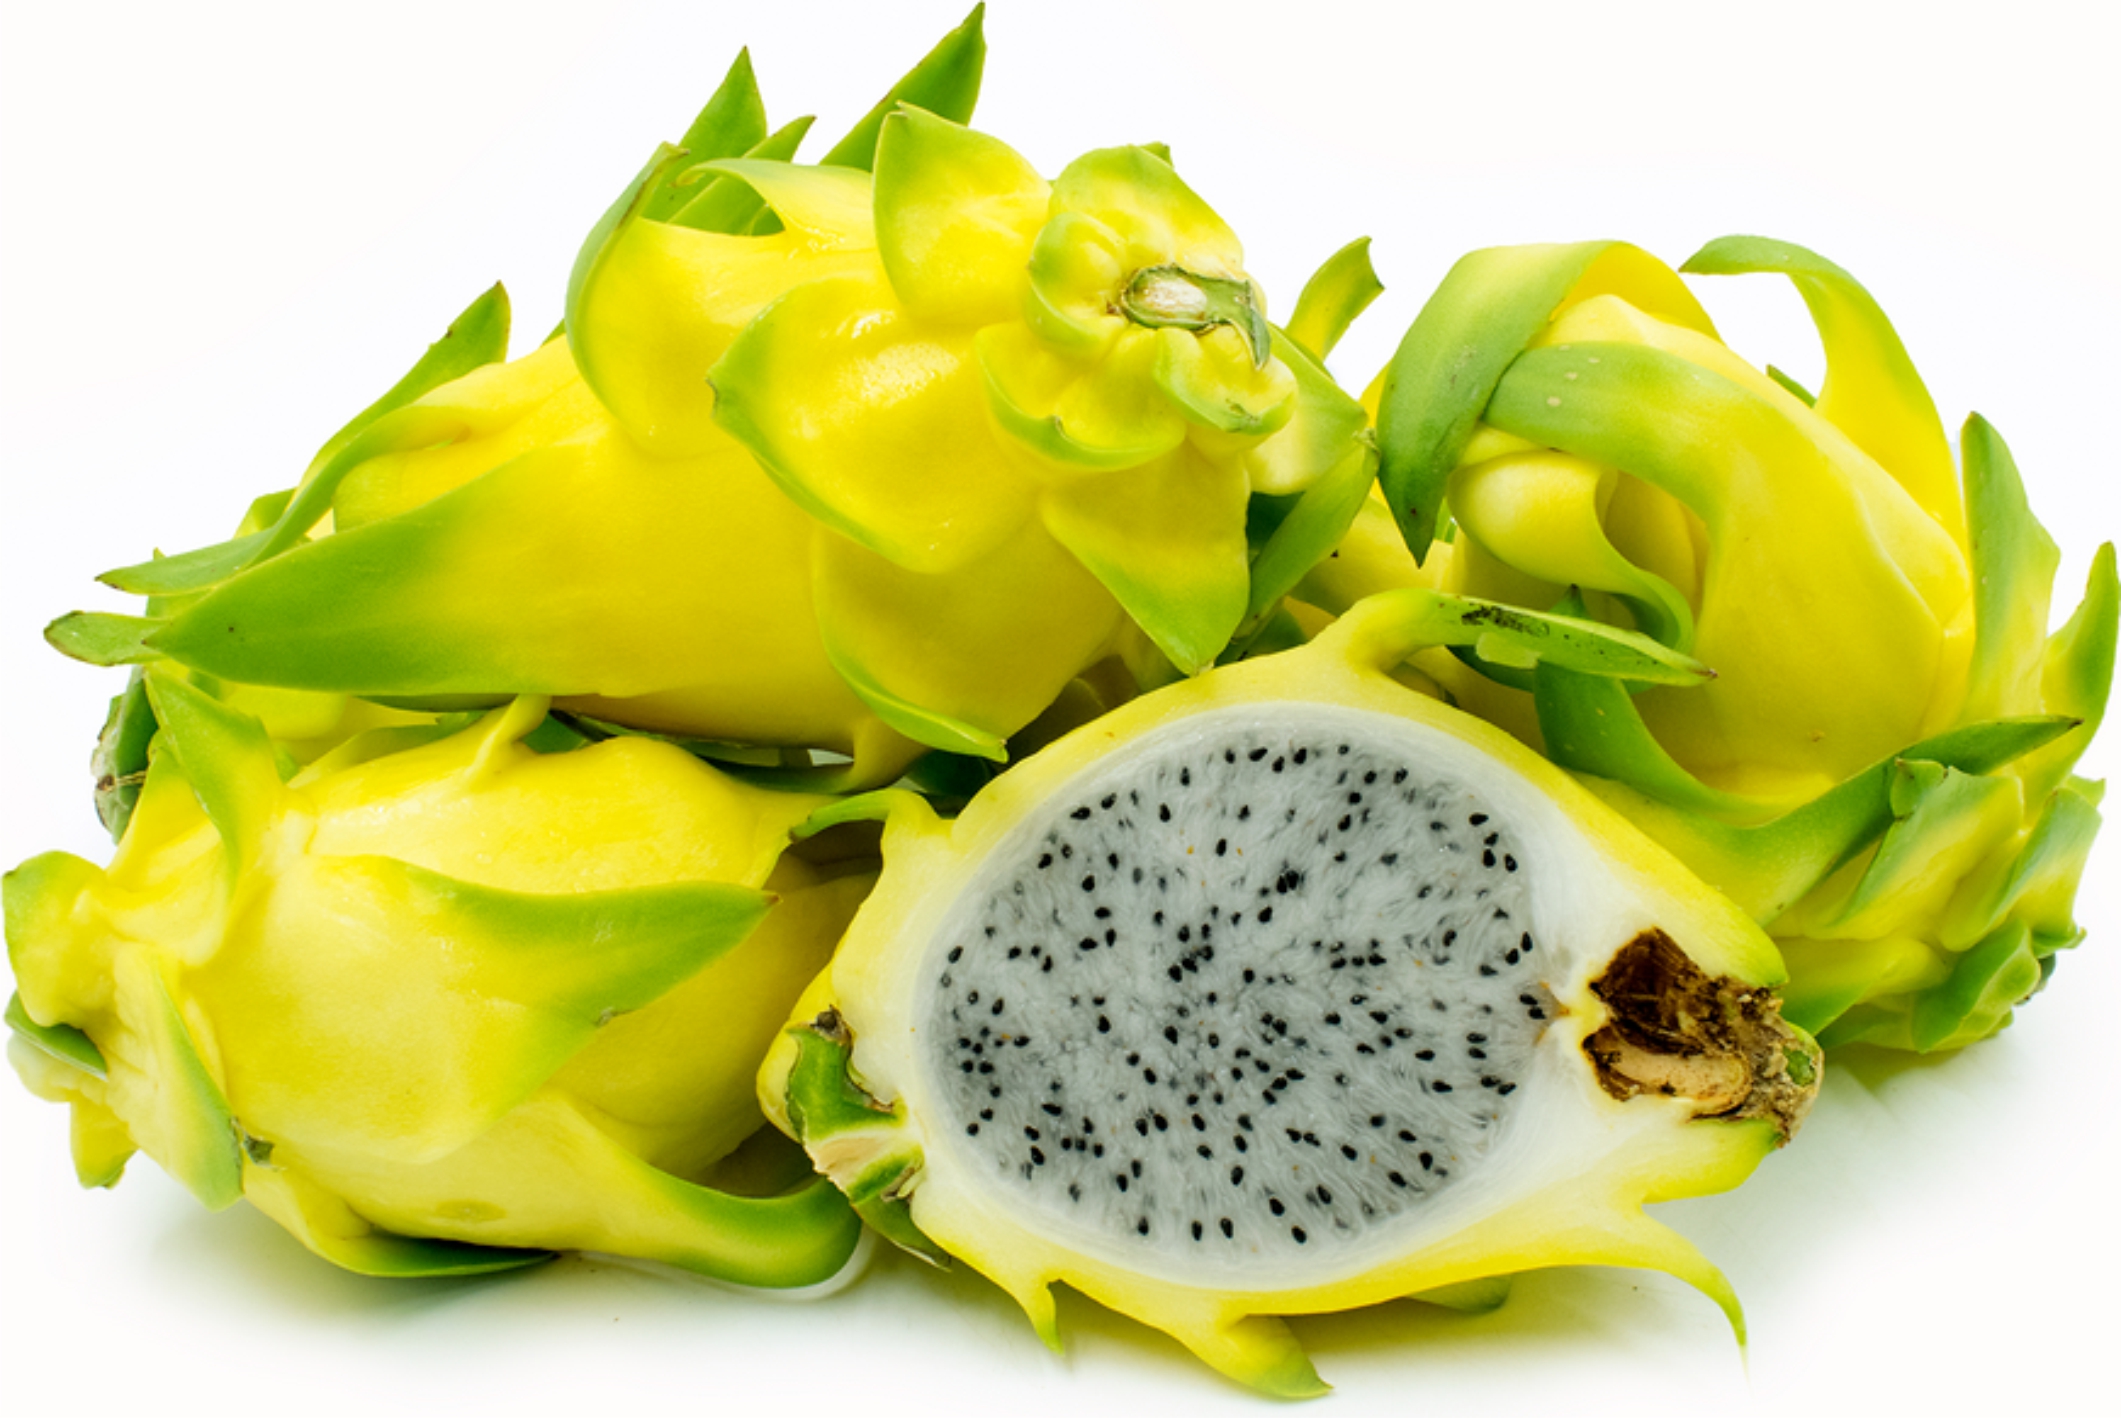 woow .. various benefits in the yellow dragon fruit is